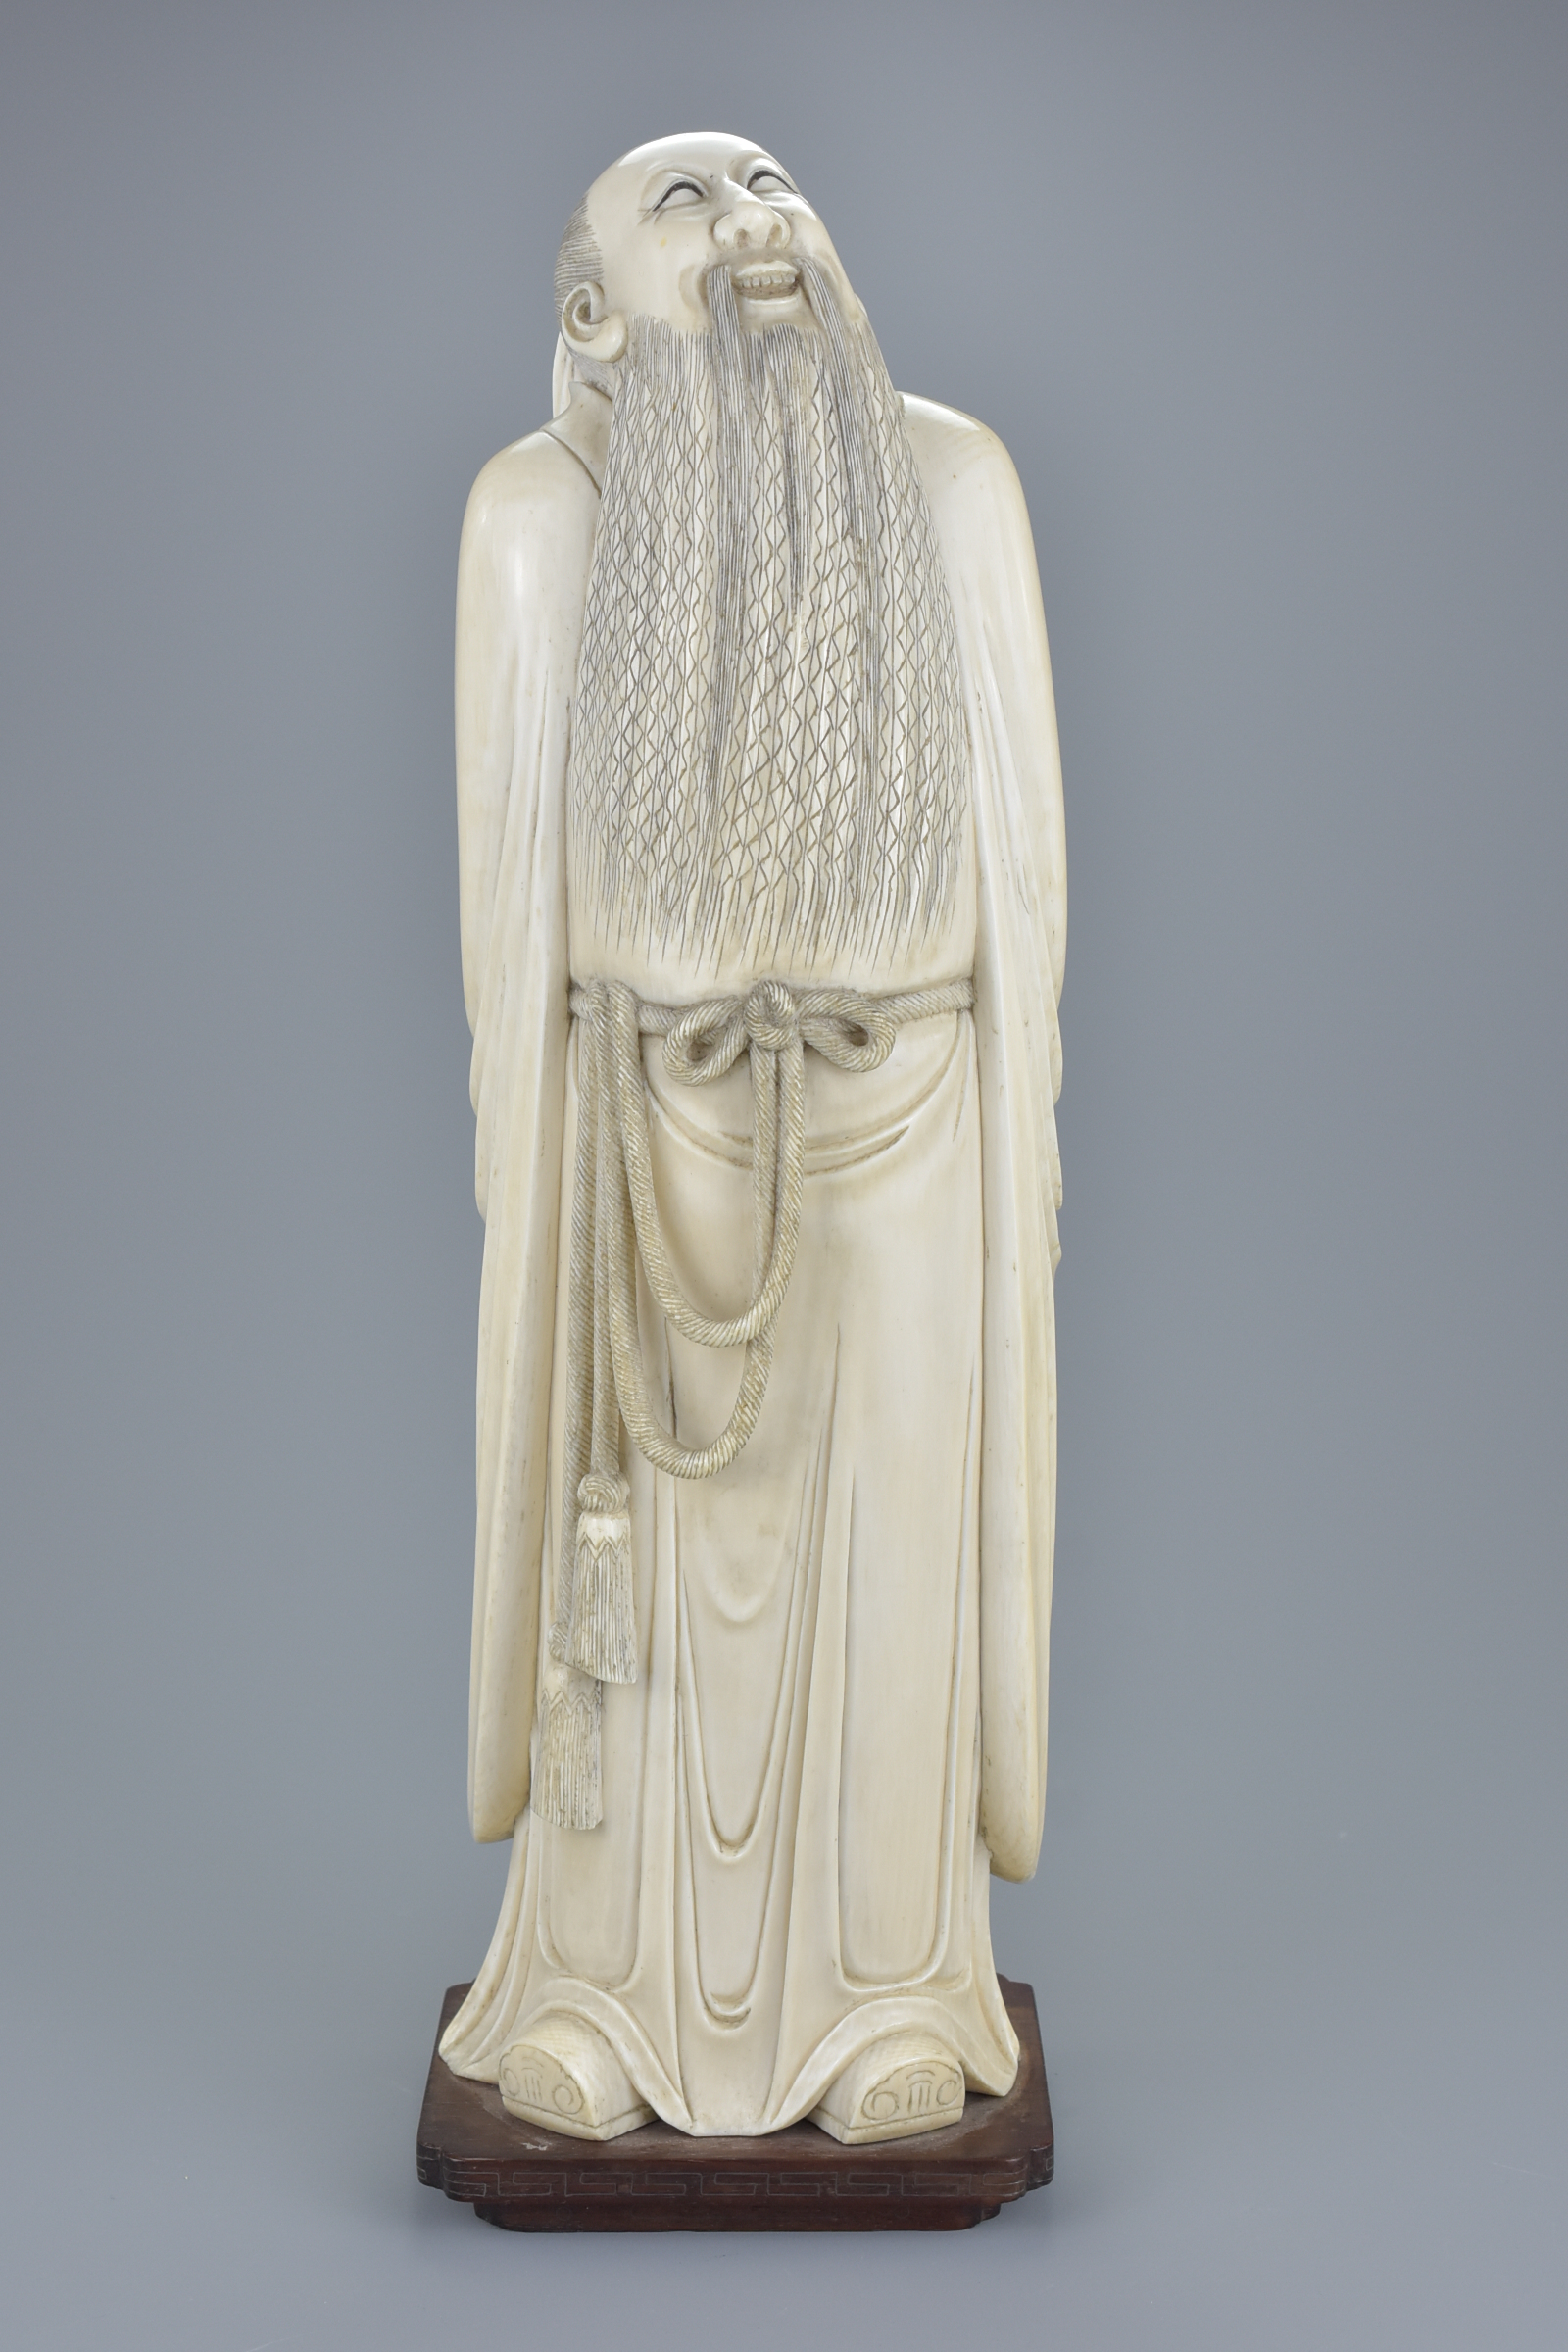 A superb quality Chinese 19th century carved ivory figure of poet Li Bai gazing at the moon with his - Image 2 of 7